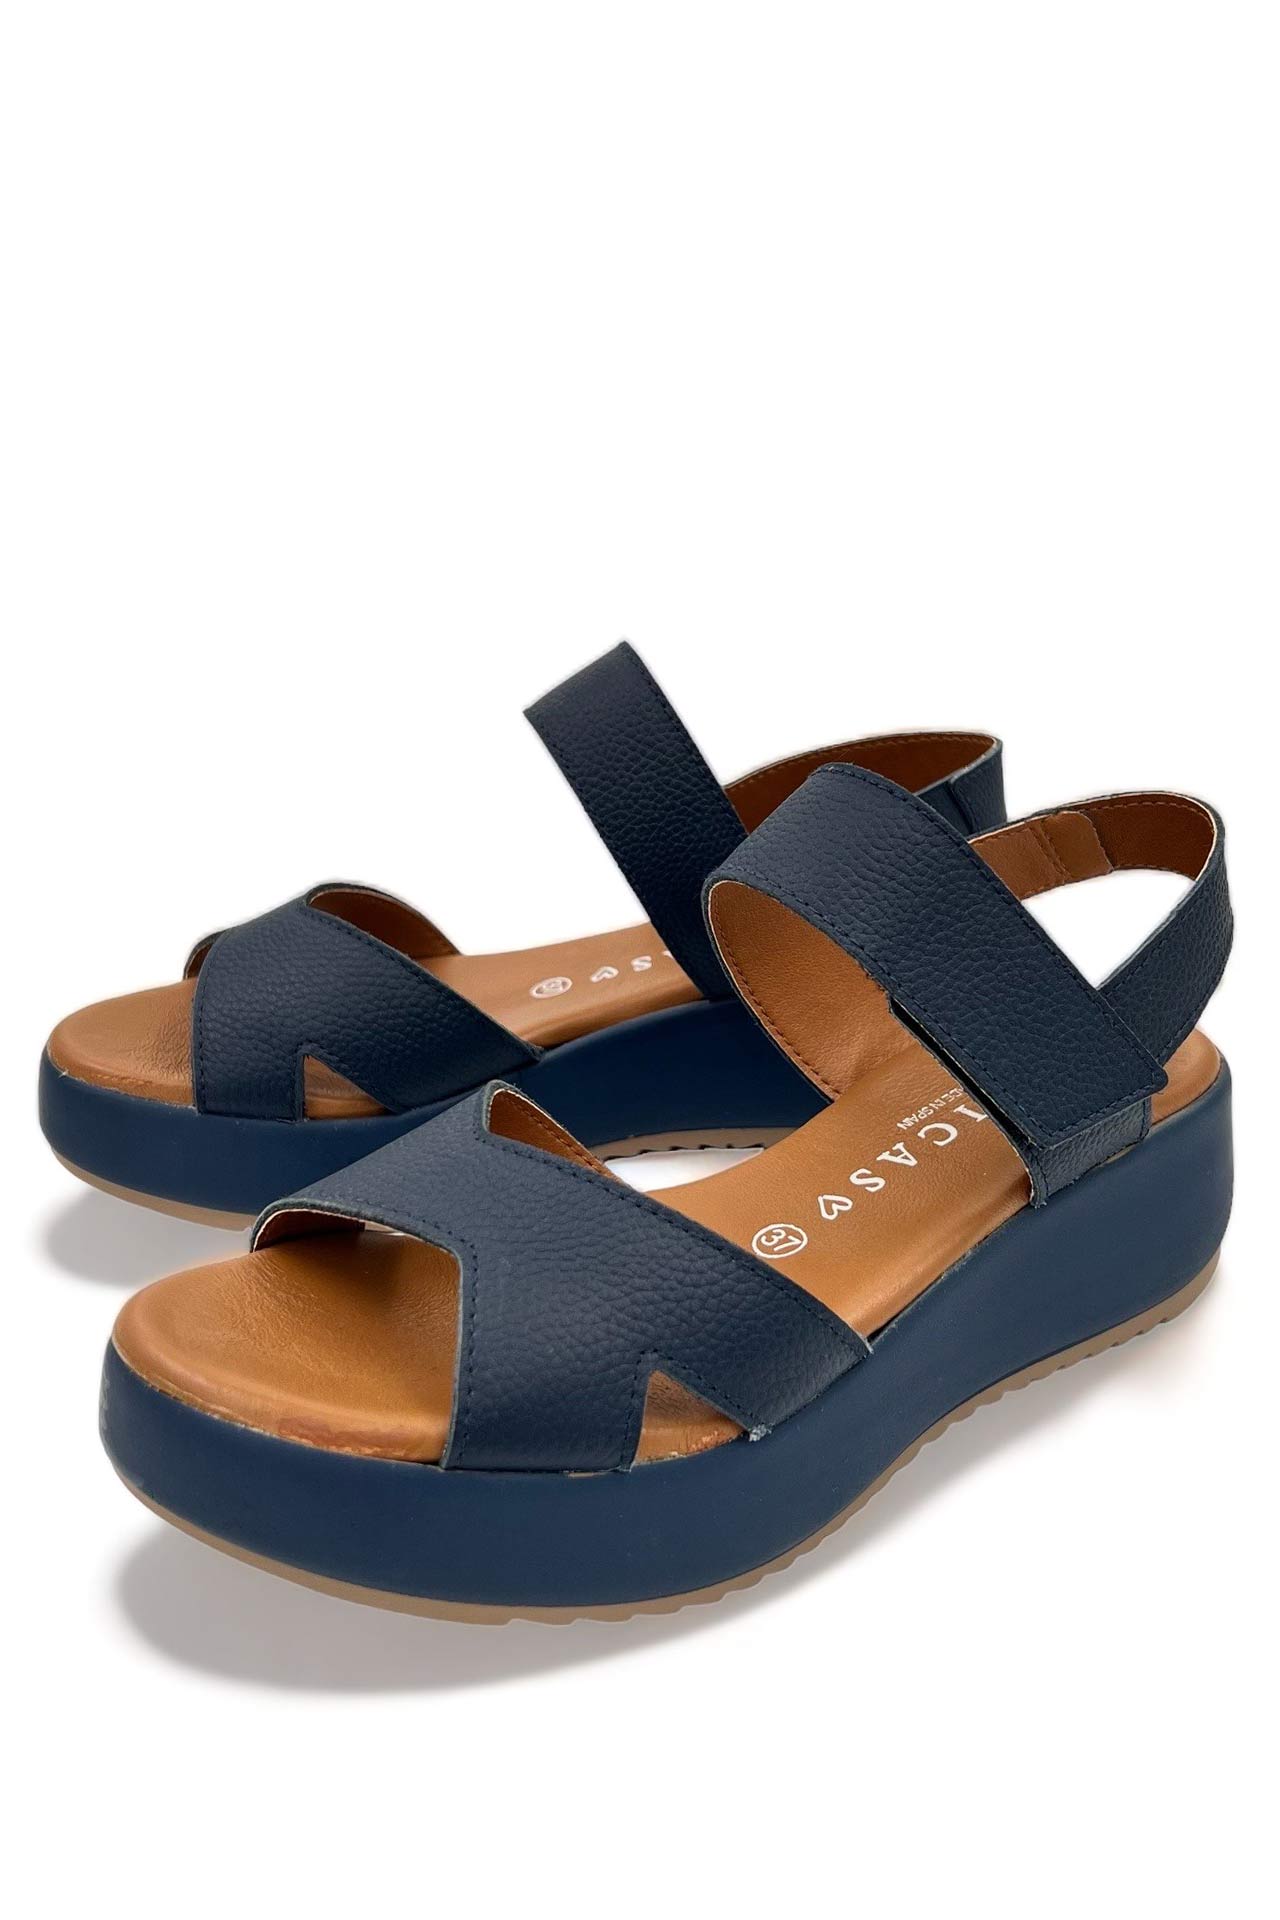 D'CHICAS NAVY LEATHER SANDALS